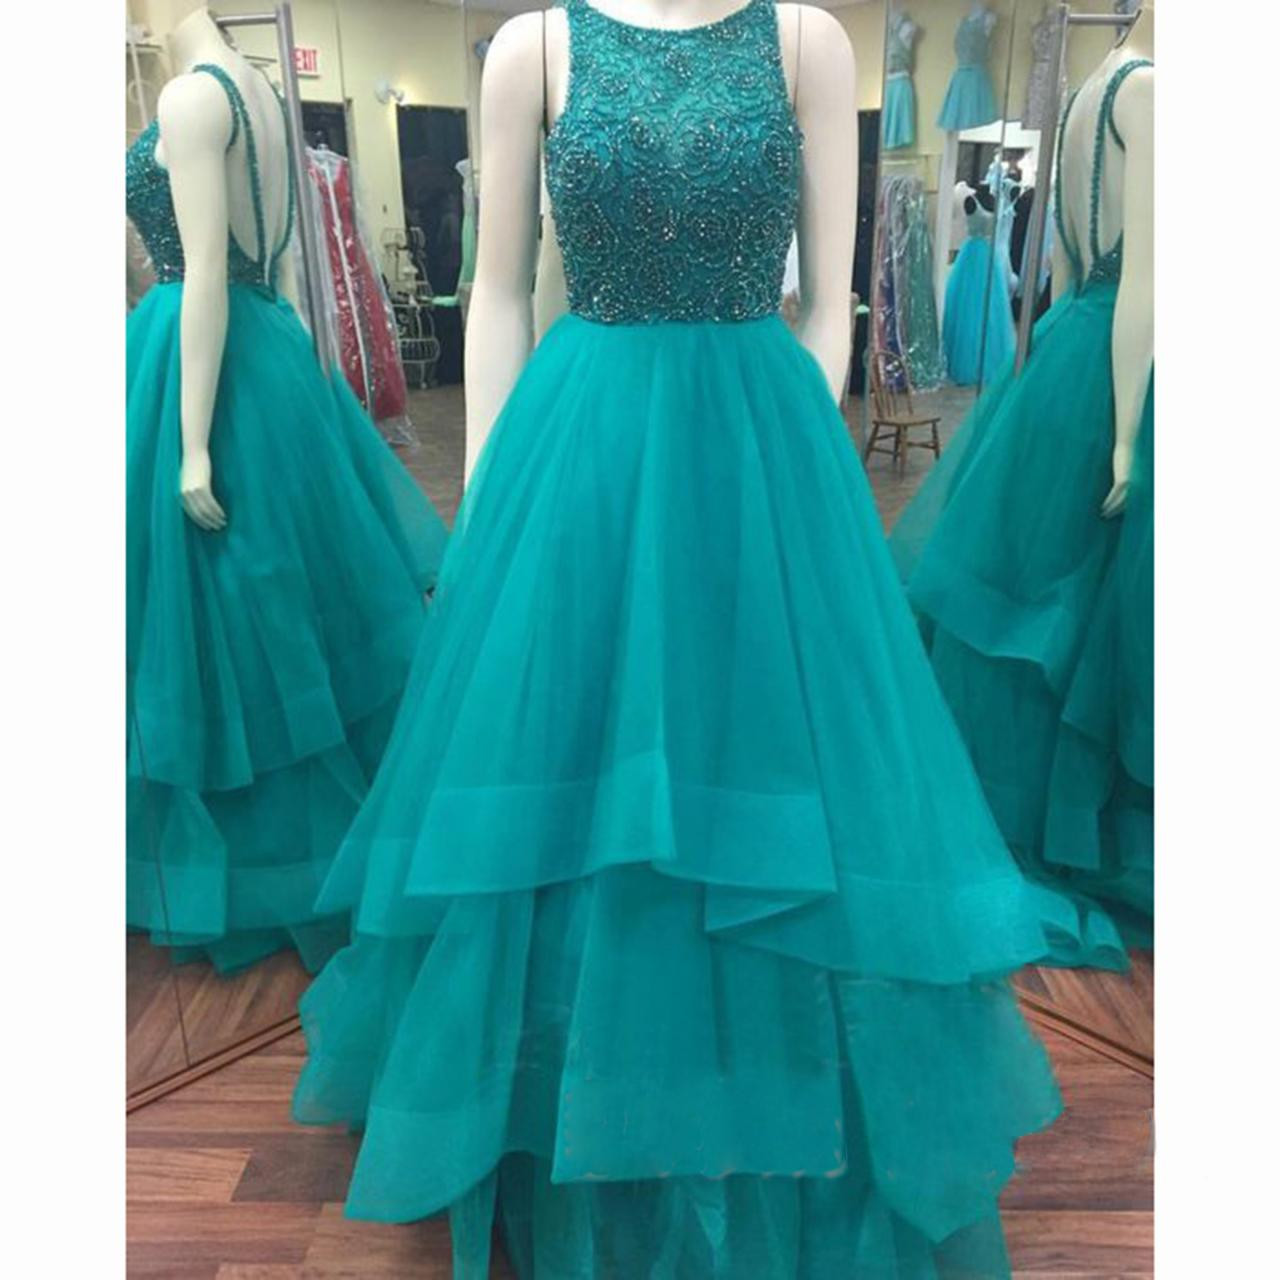 Sleeveless High Neck Floor-length A-line Prom Evening Dress With Beaded Embellished Bodice